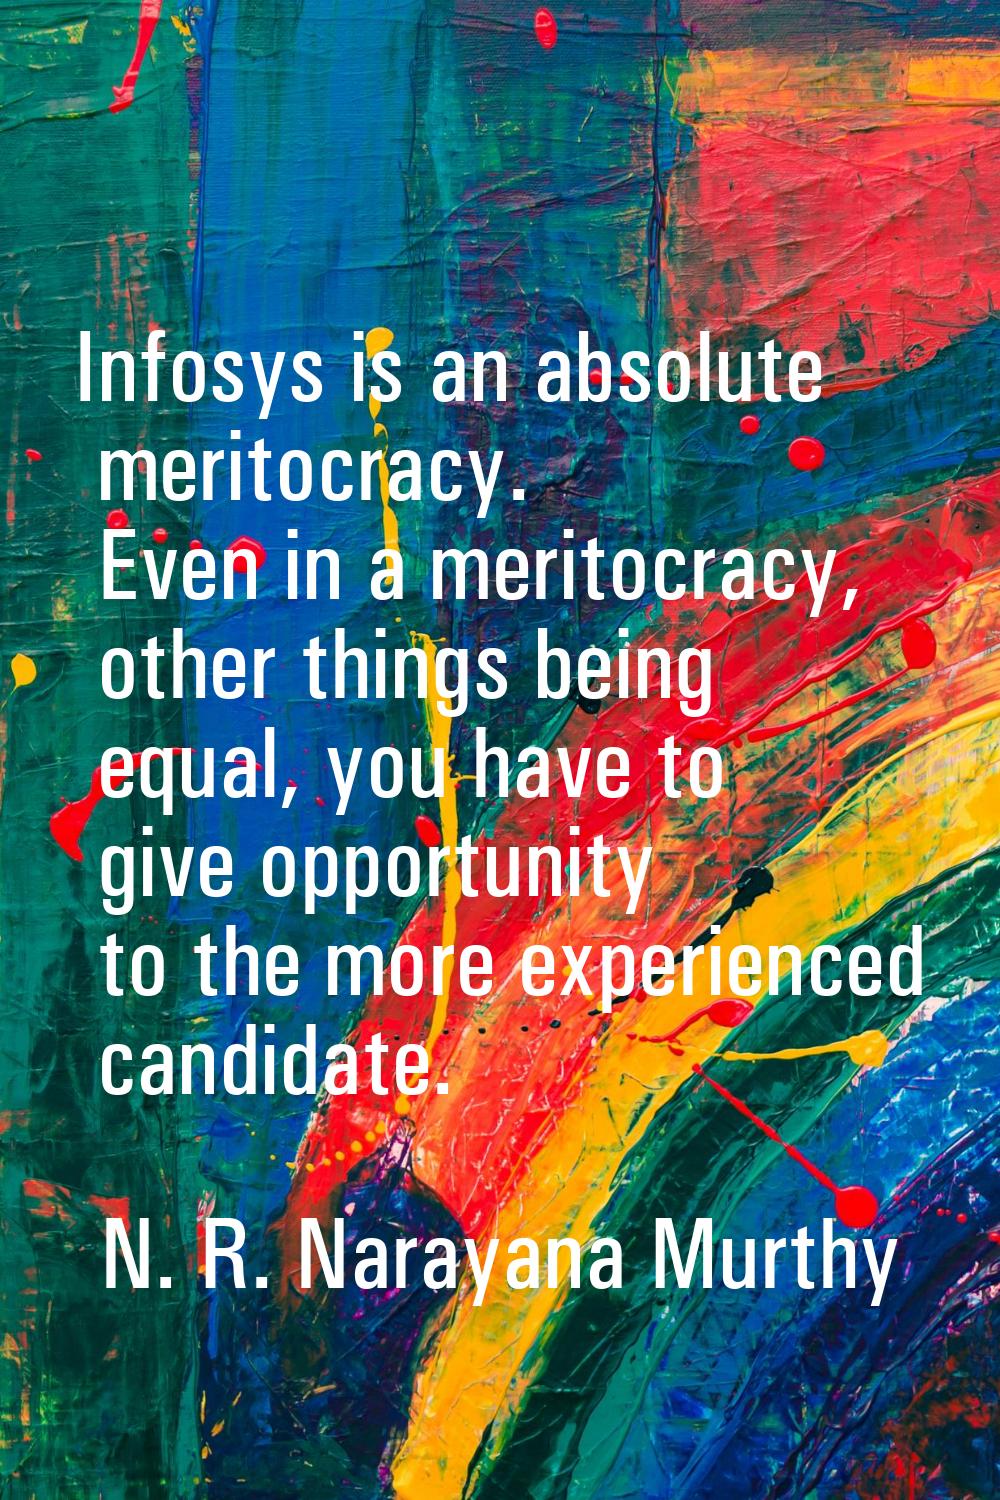 Infosys is an absolute meritocracy. Even in a meritocracy, other things being equal, you have to gi